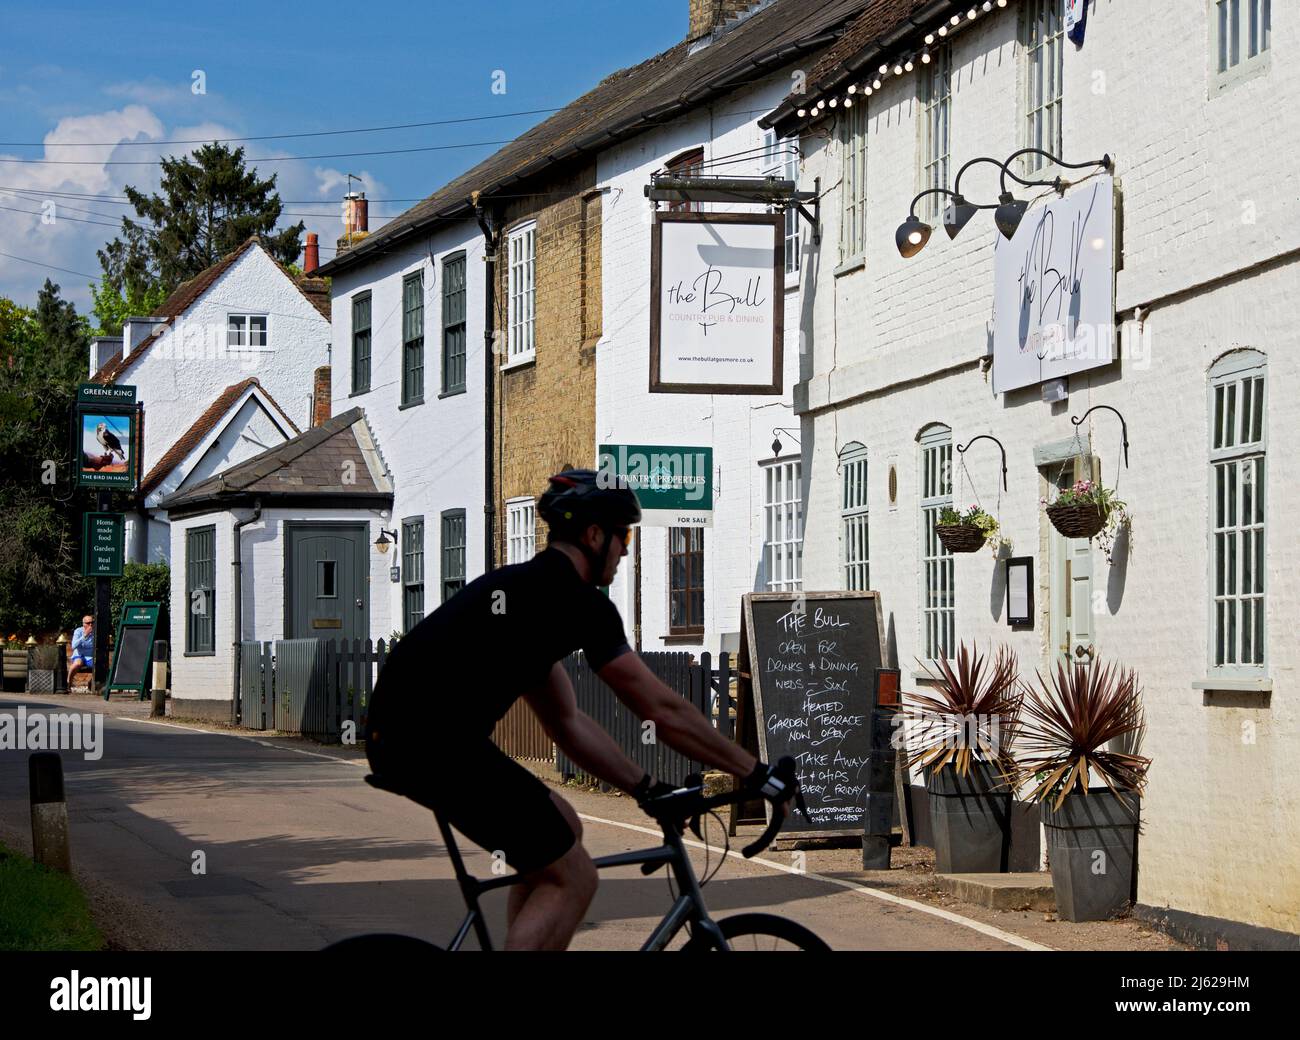 Man cycling past the Bull pub in the village of Gosmore, Hertfordshire, England UK Stock Photo